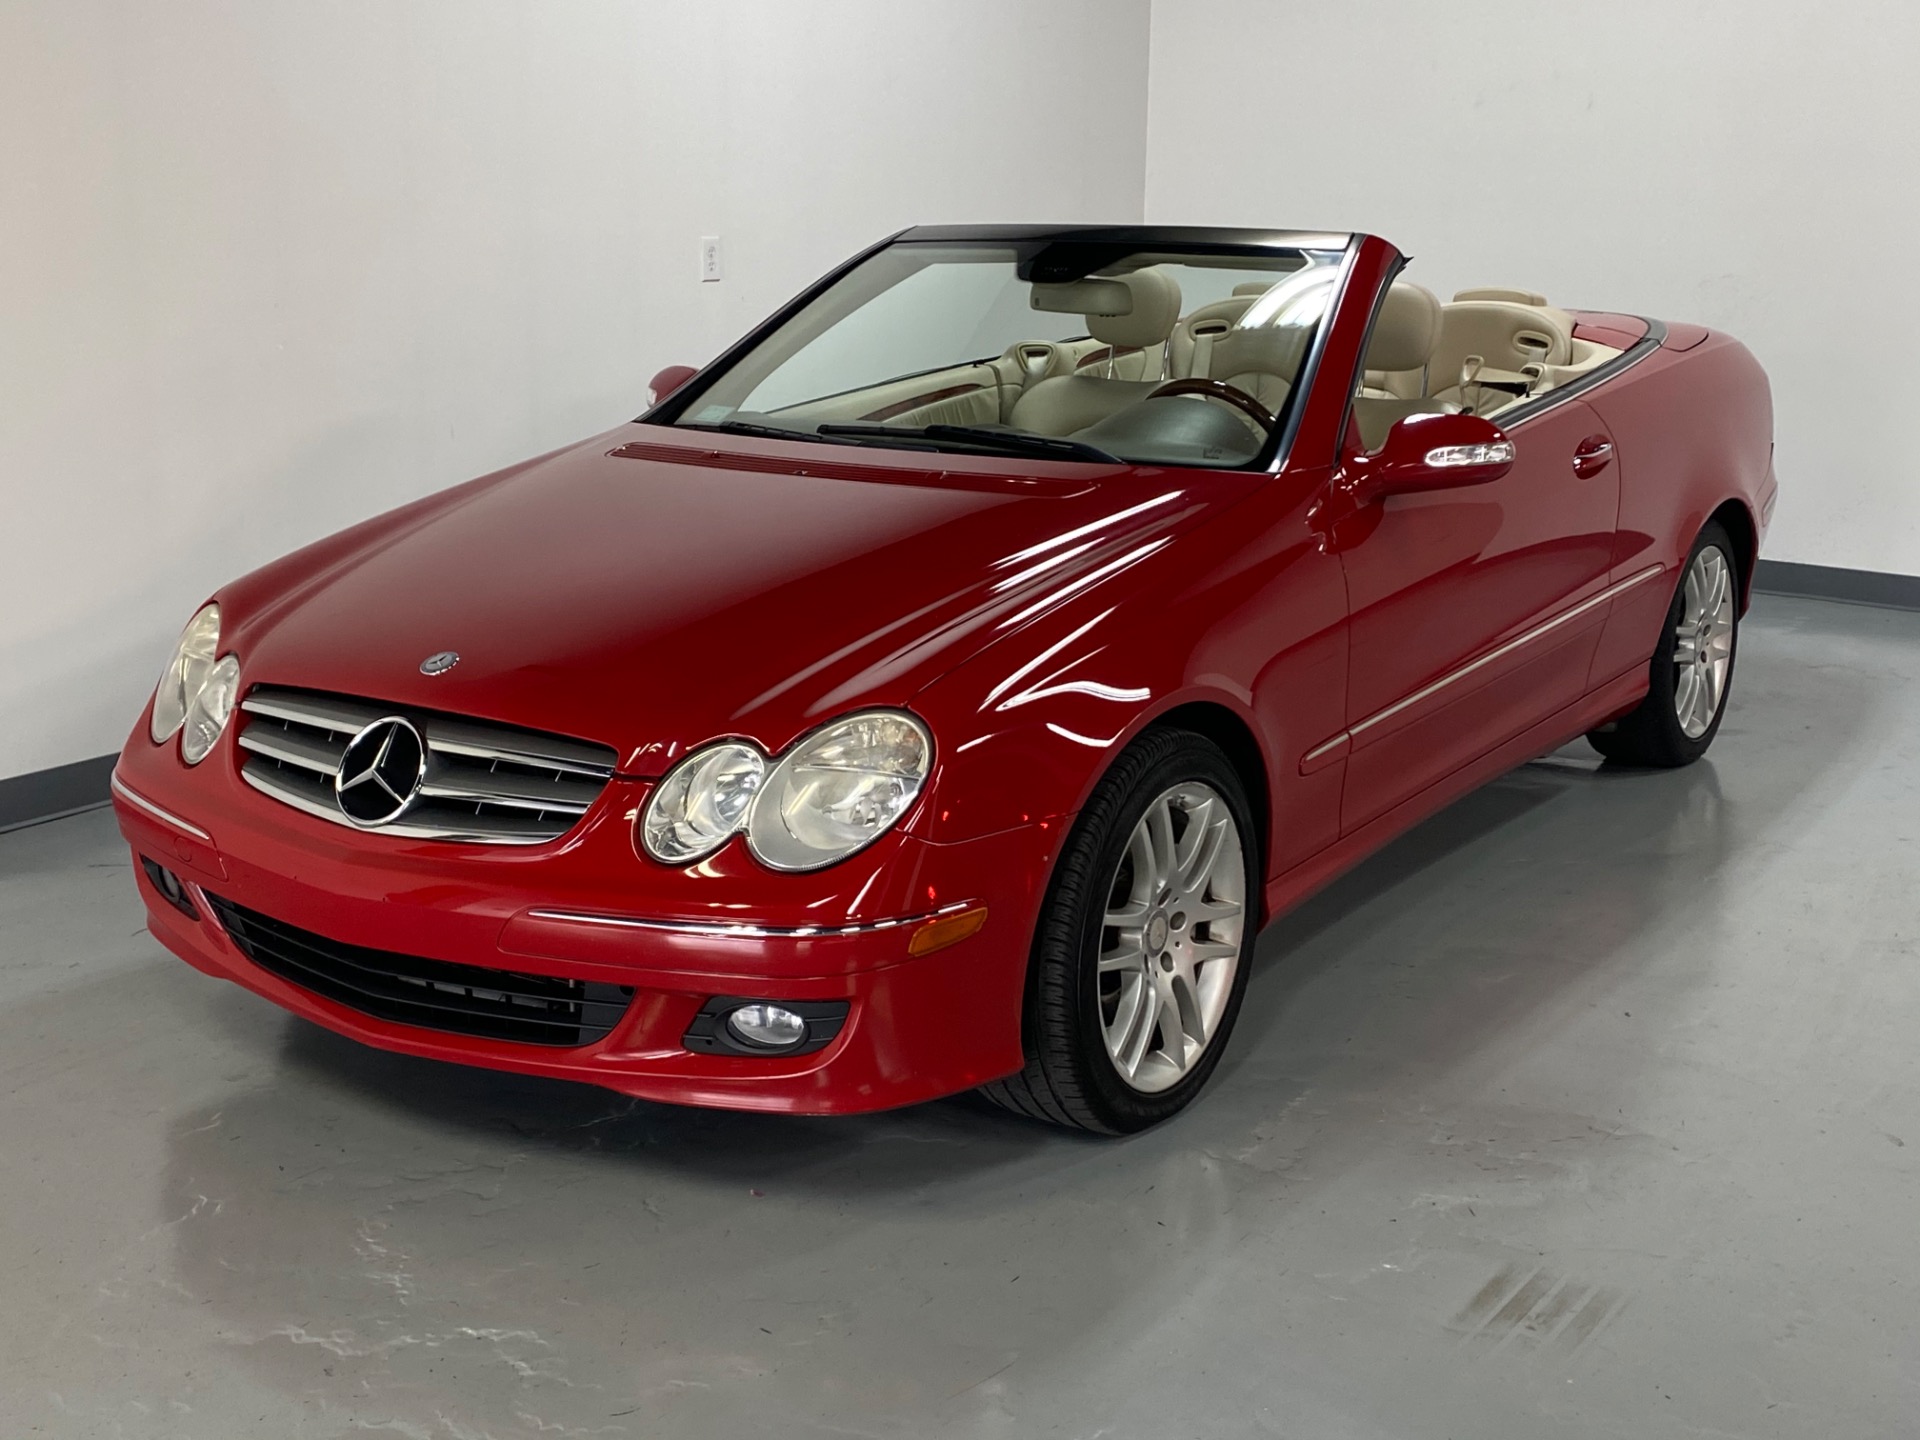 Used 2009 Mars Red Mercedes-Benz CLK 350 CONVERTIBLE CLK 350 For Sale  (Sold) | Prime Motorz Stock #3007